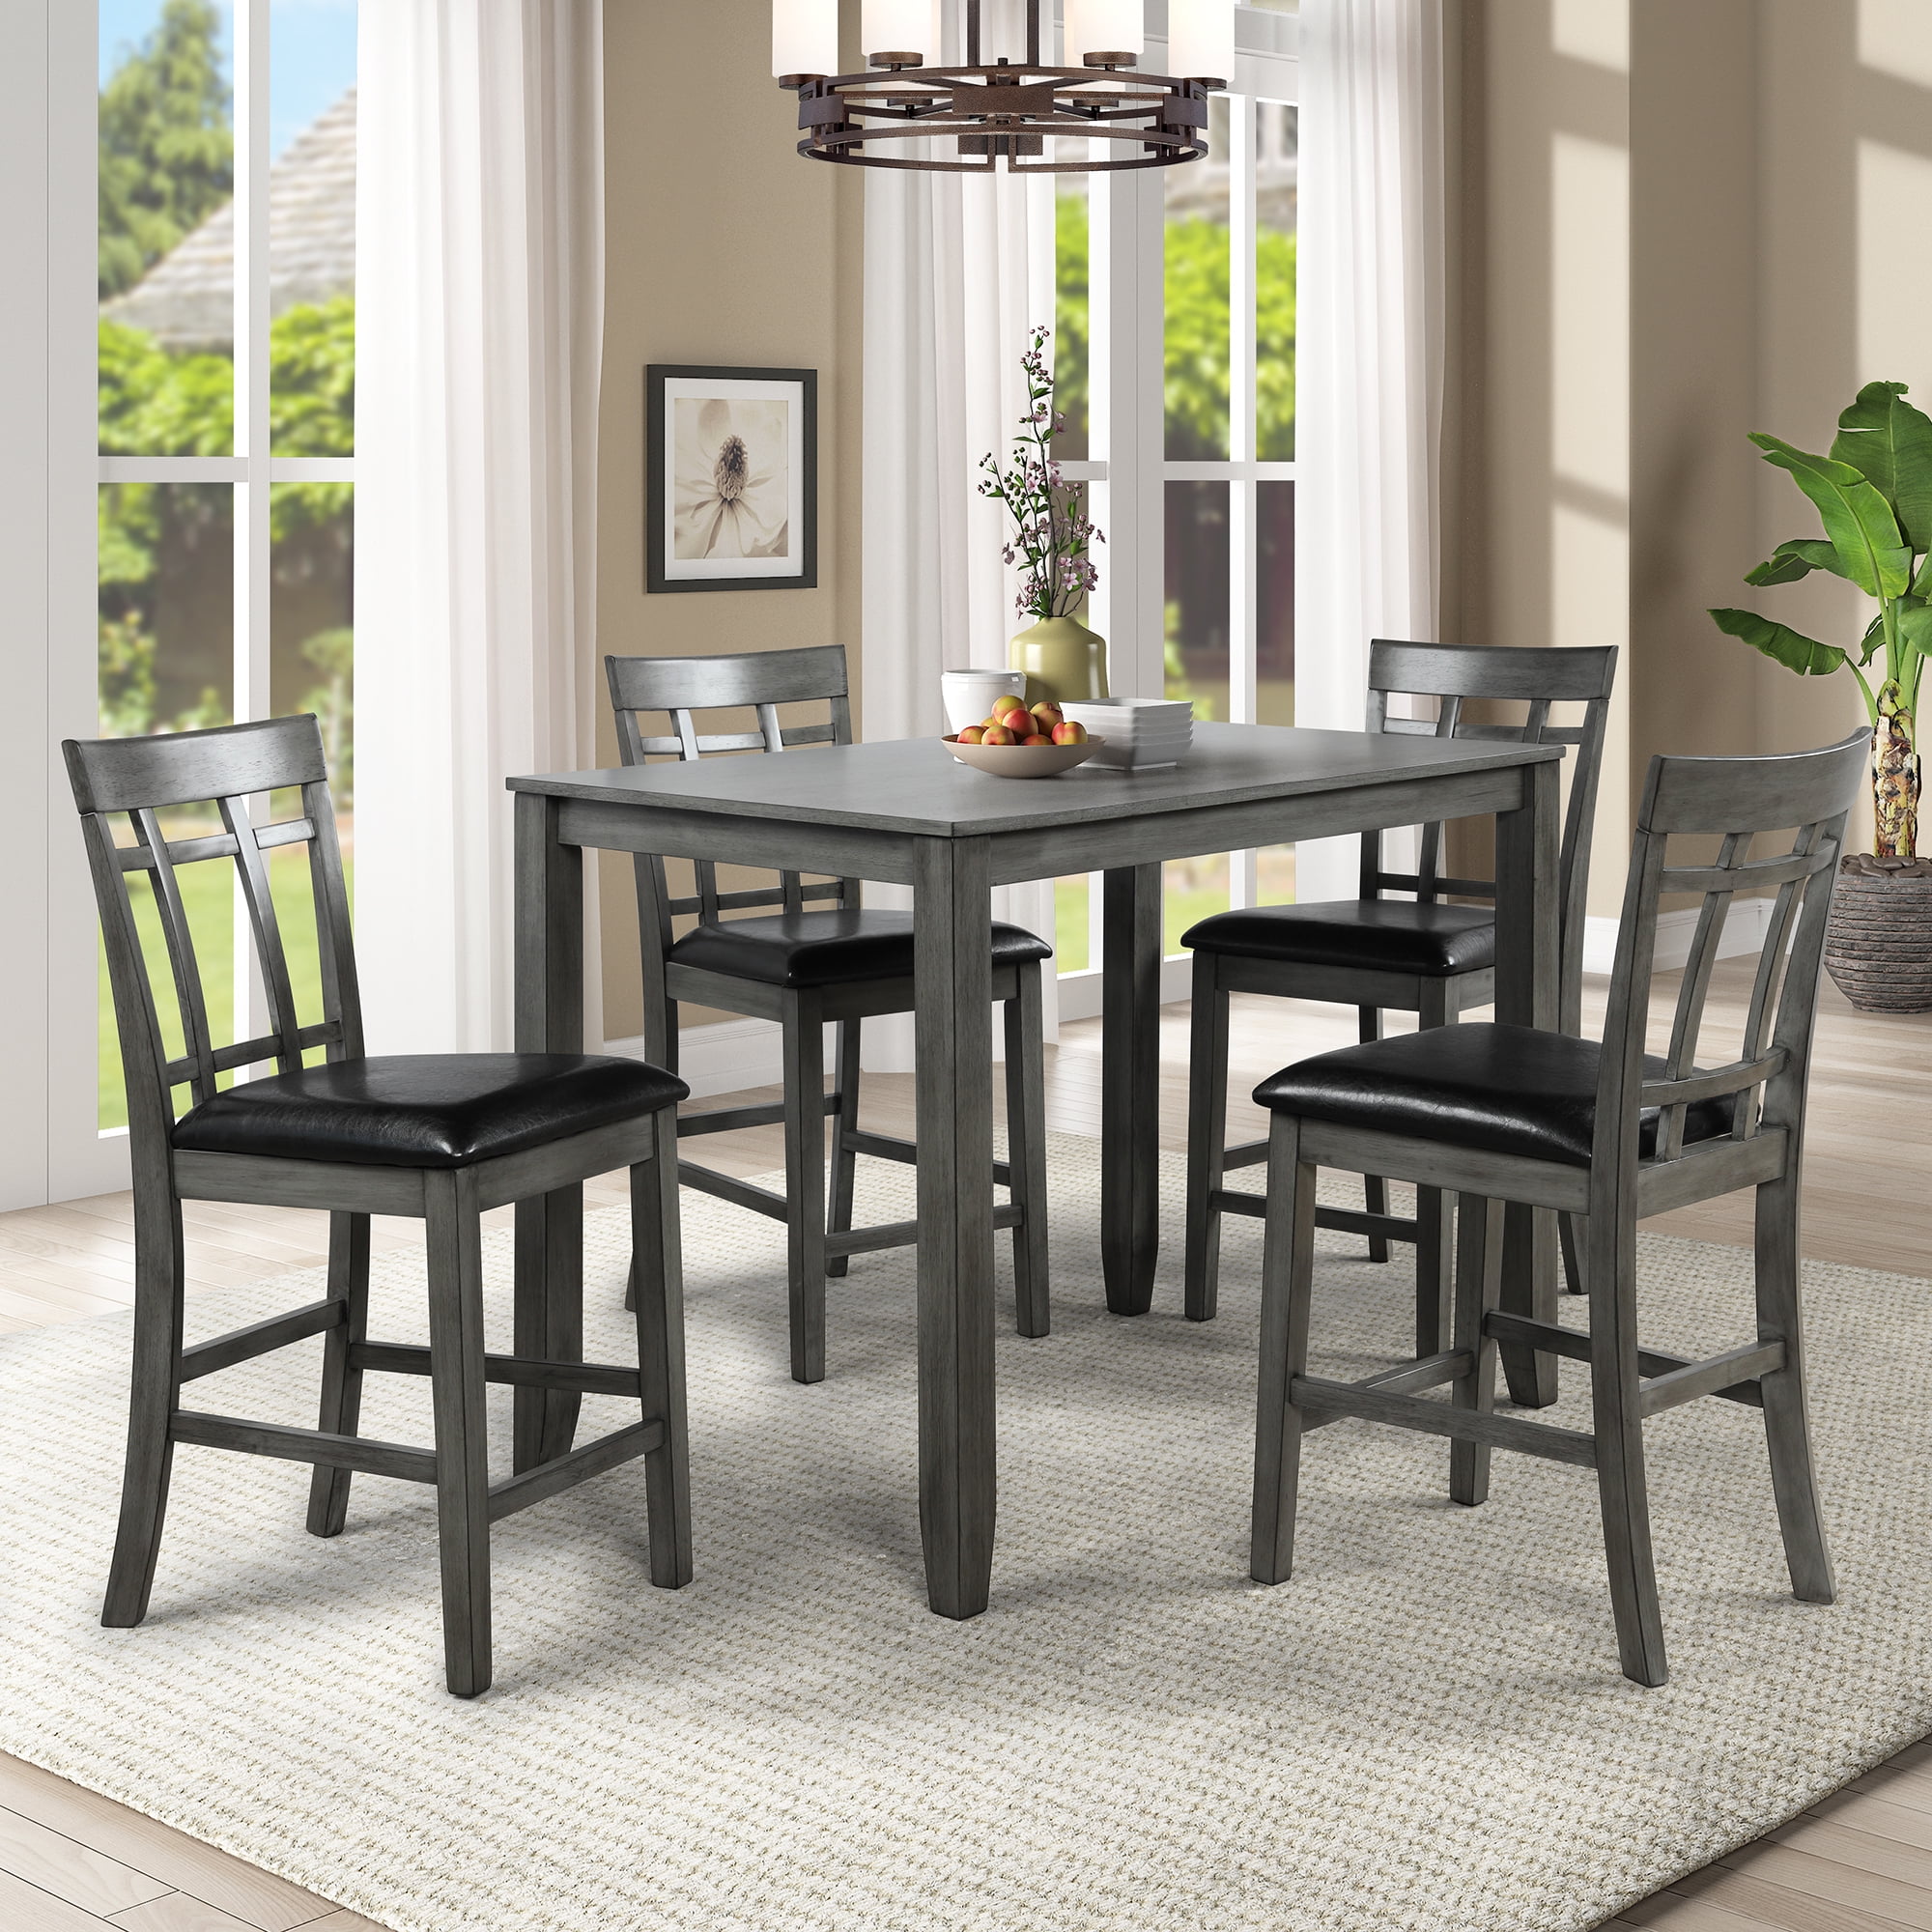 Counter Height Dining Set for 4, Wooden Rectangle Dining Table with 4